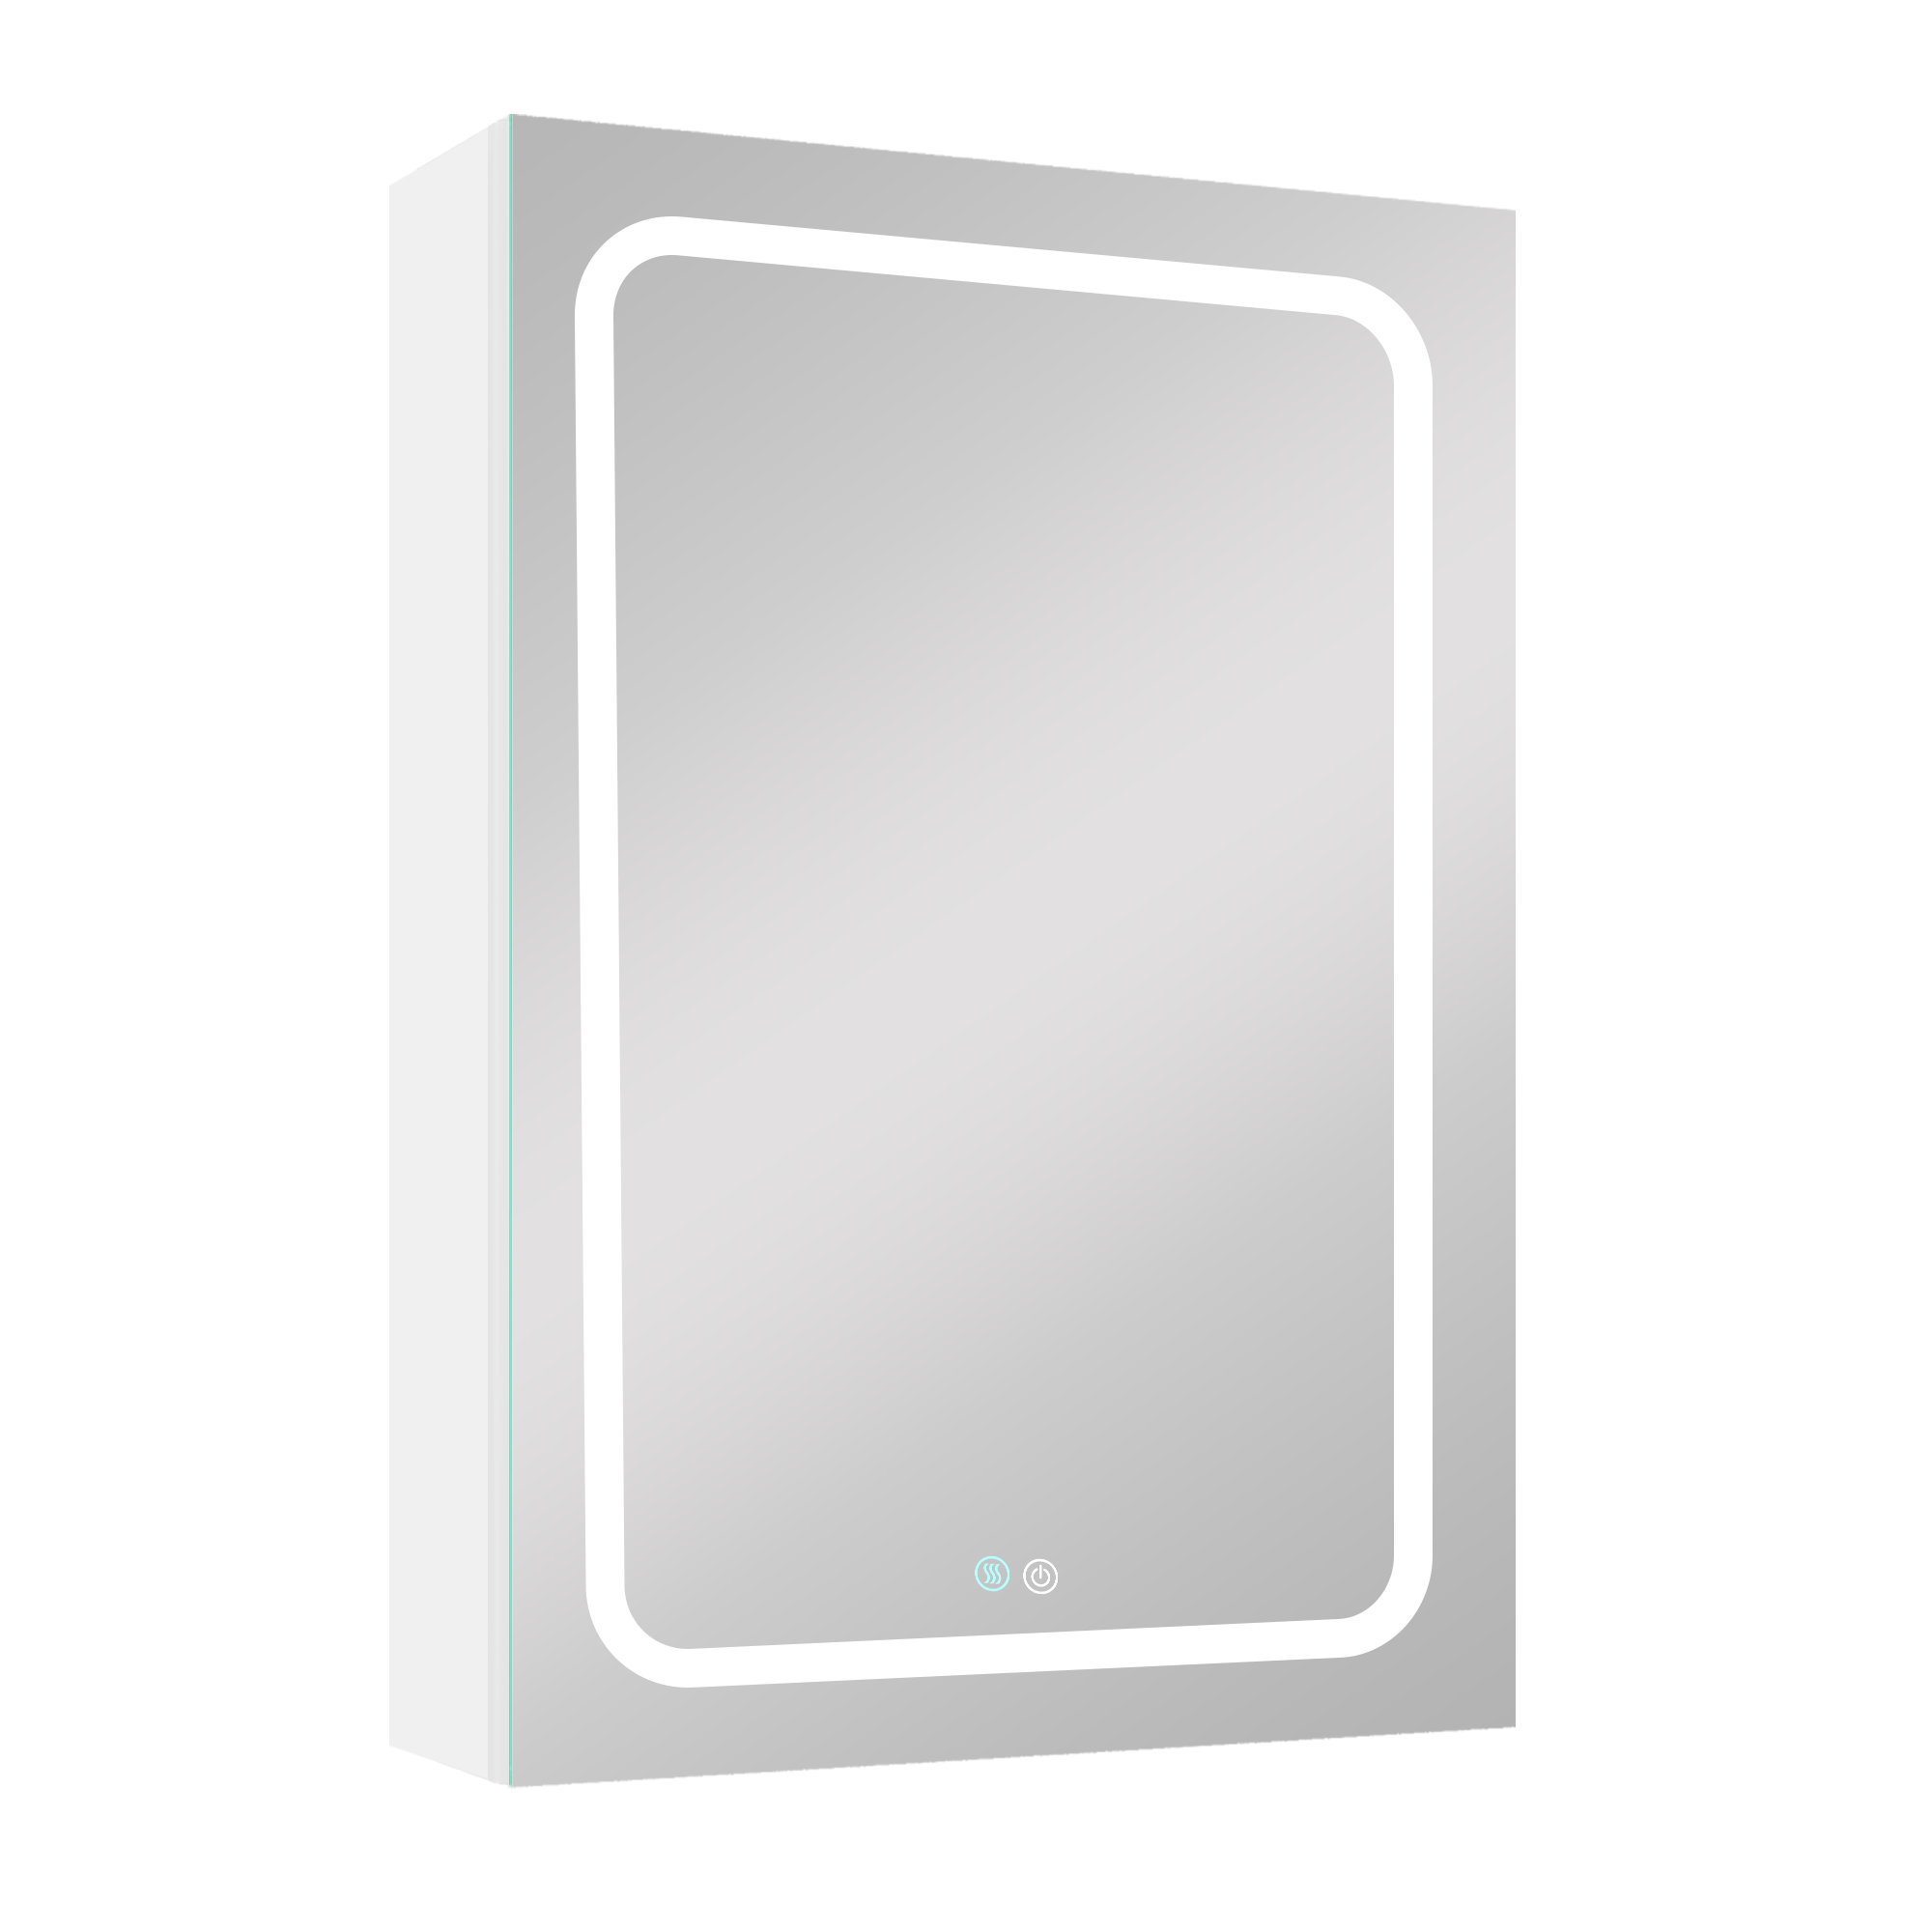 ZNTS 30x20 inch LED Bathroom Medicine Cabinet Surface Mounted Cabinets With Lighted Mirror White Left W995107195